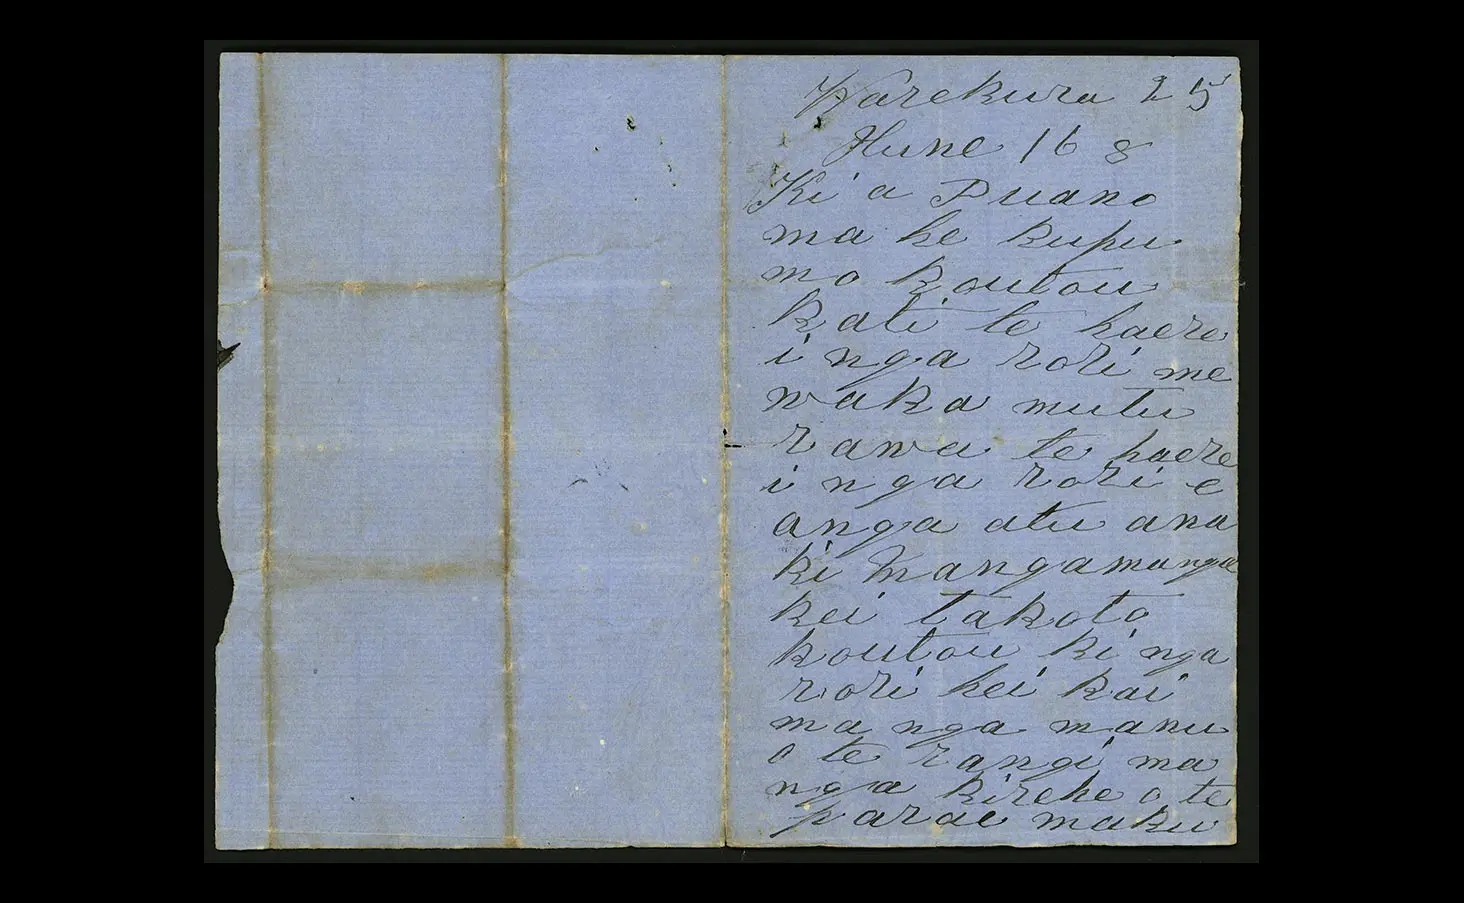 Colour photo of a letter written in 1868 by Ngāti Ruanui rangatira Riwha Tītokowaru in te reo Māori. It shows the first page of the letter.